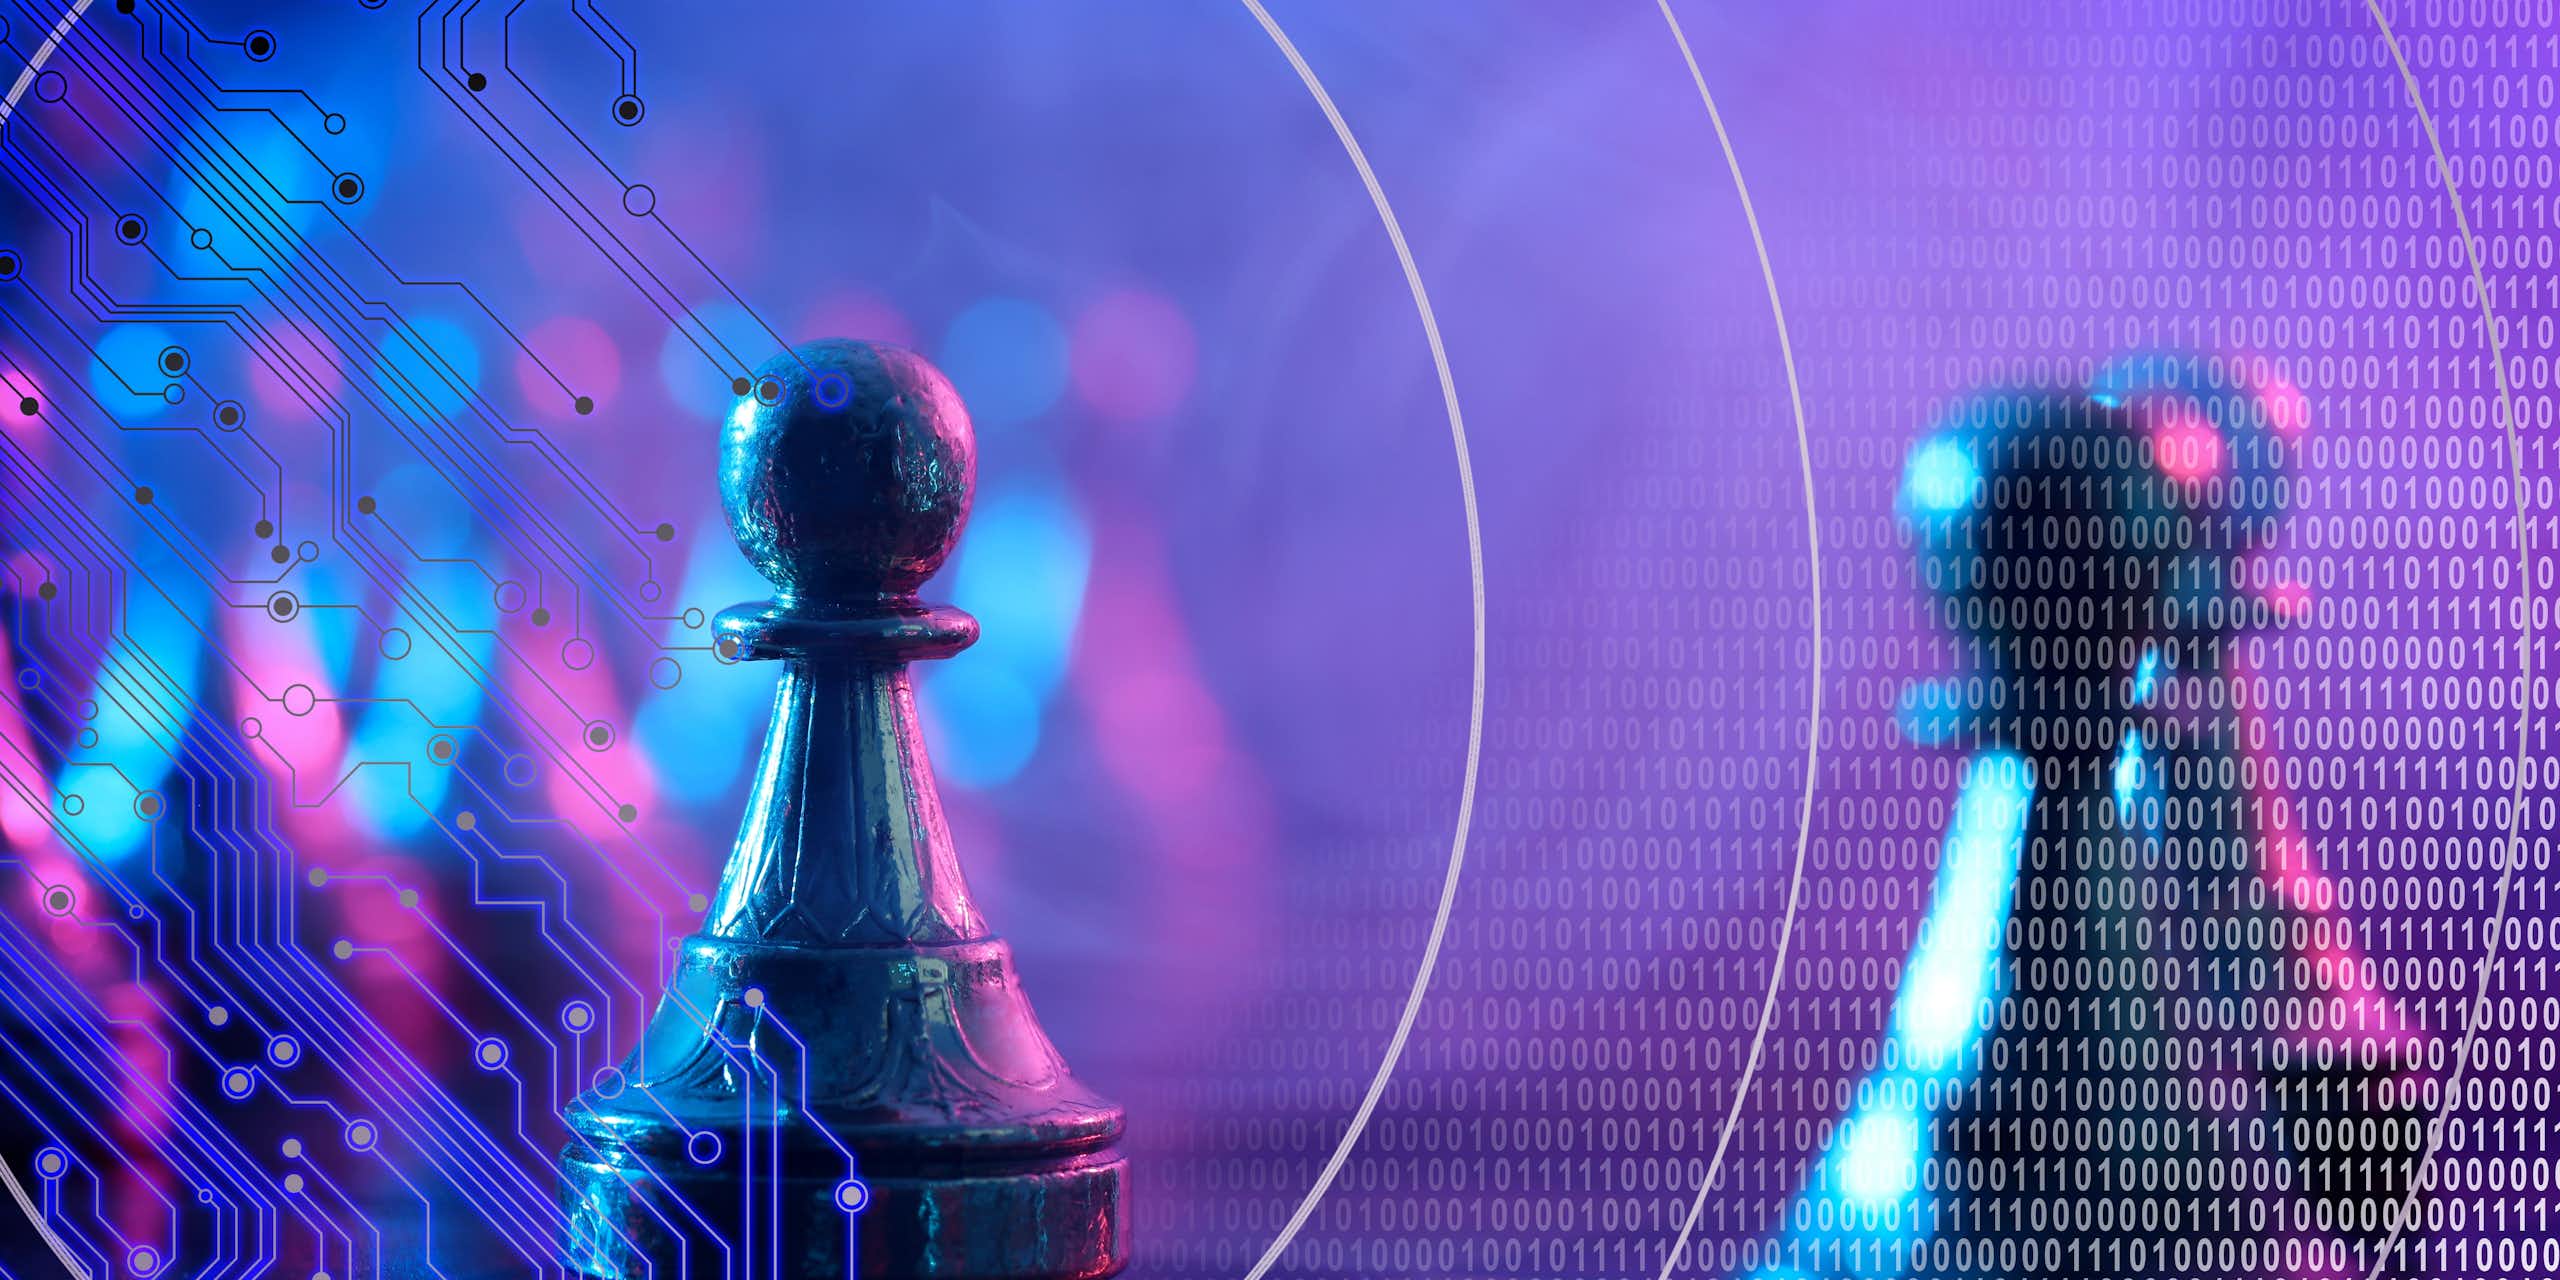 Chess pieces with a blue and purple screen behind them.